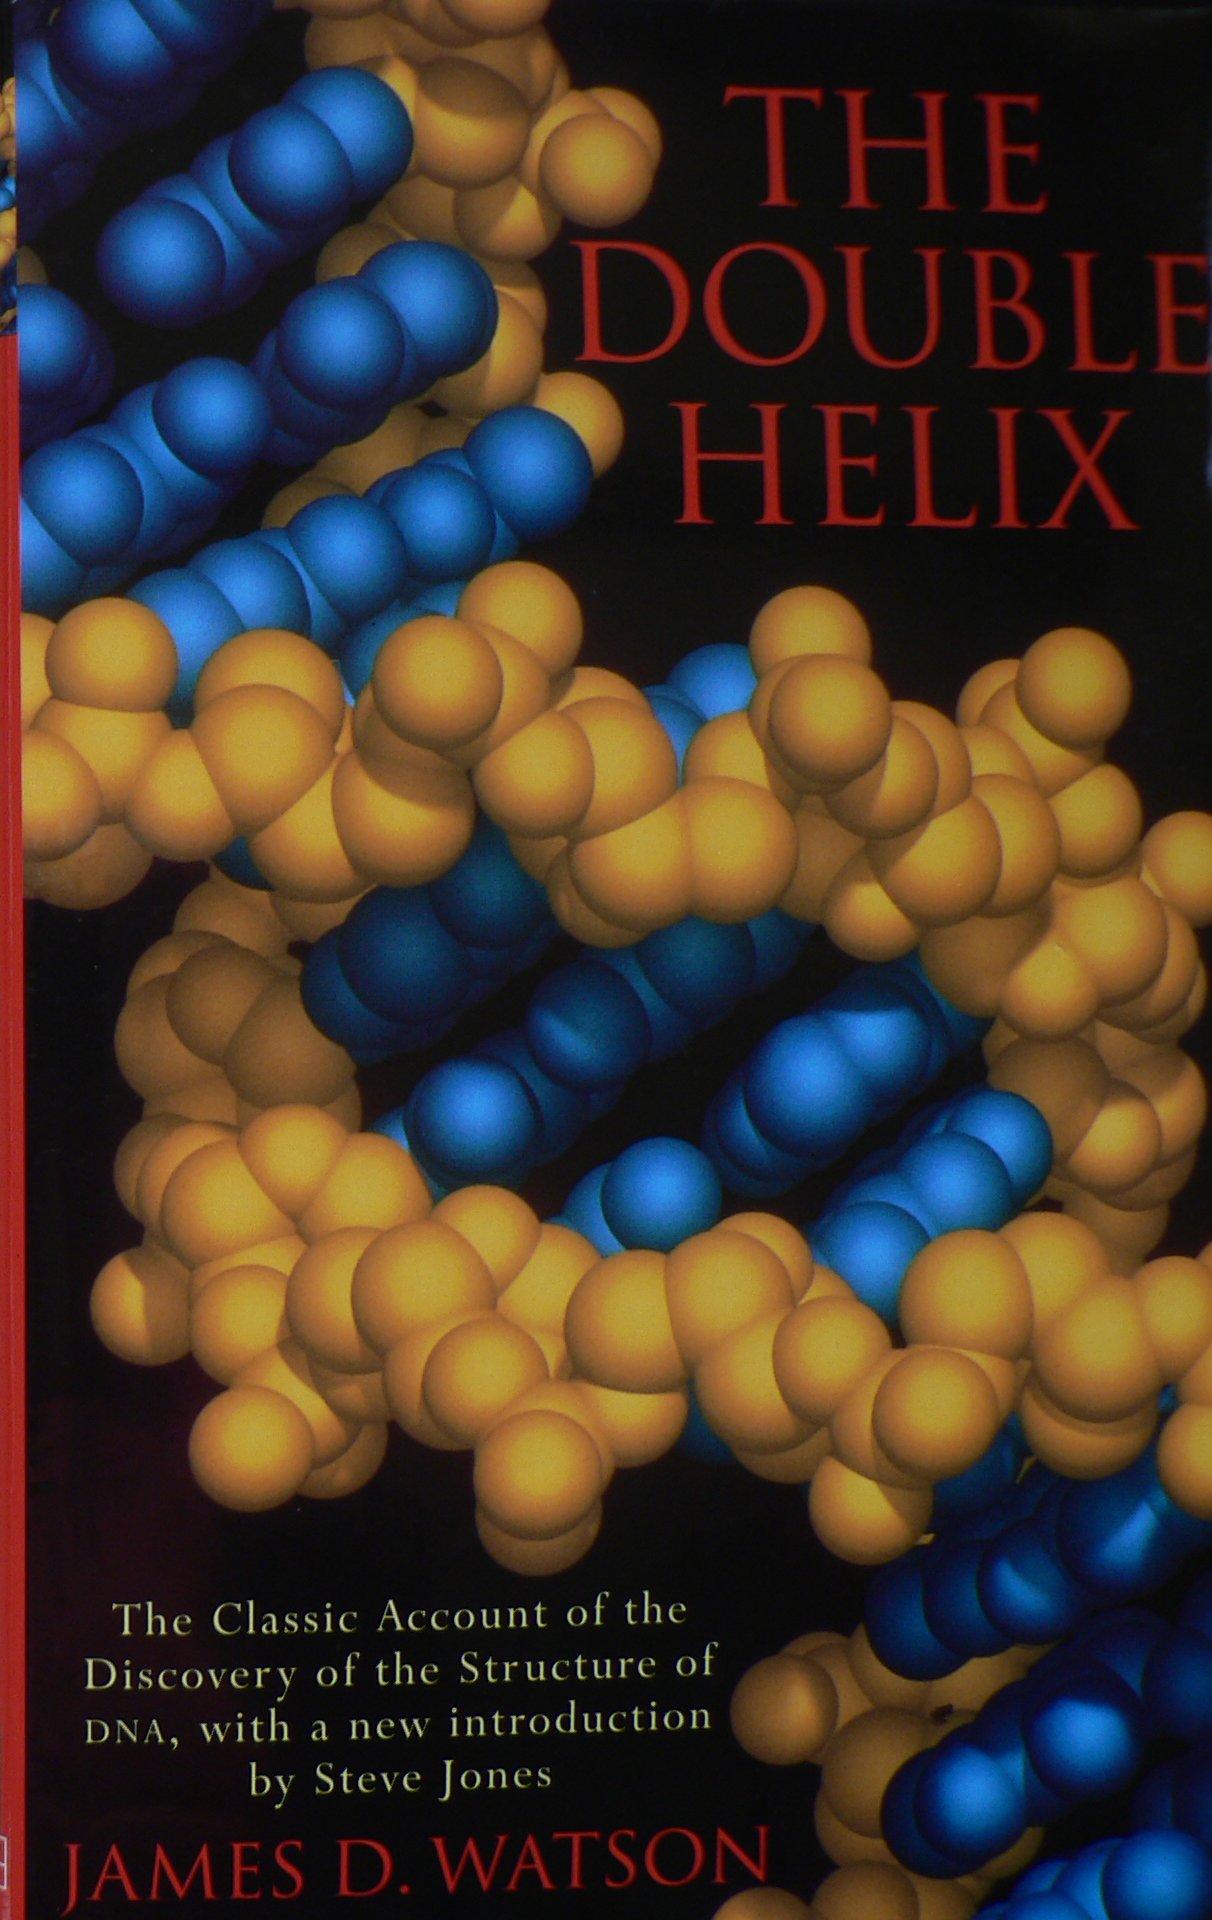 The Double Helix  - UK Version  - Signed by Dr. James Watson